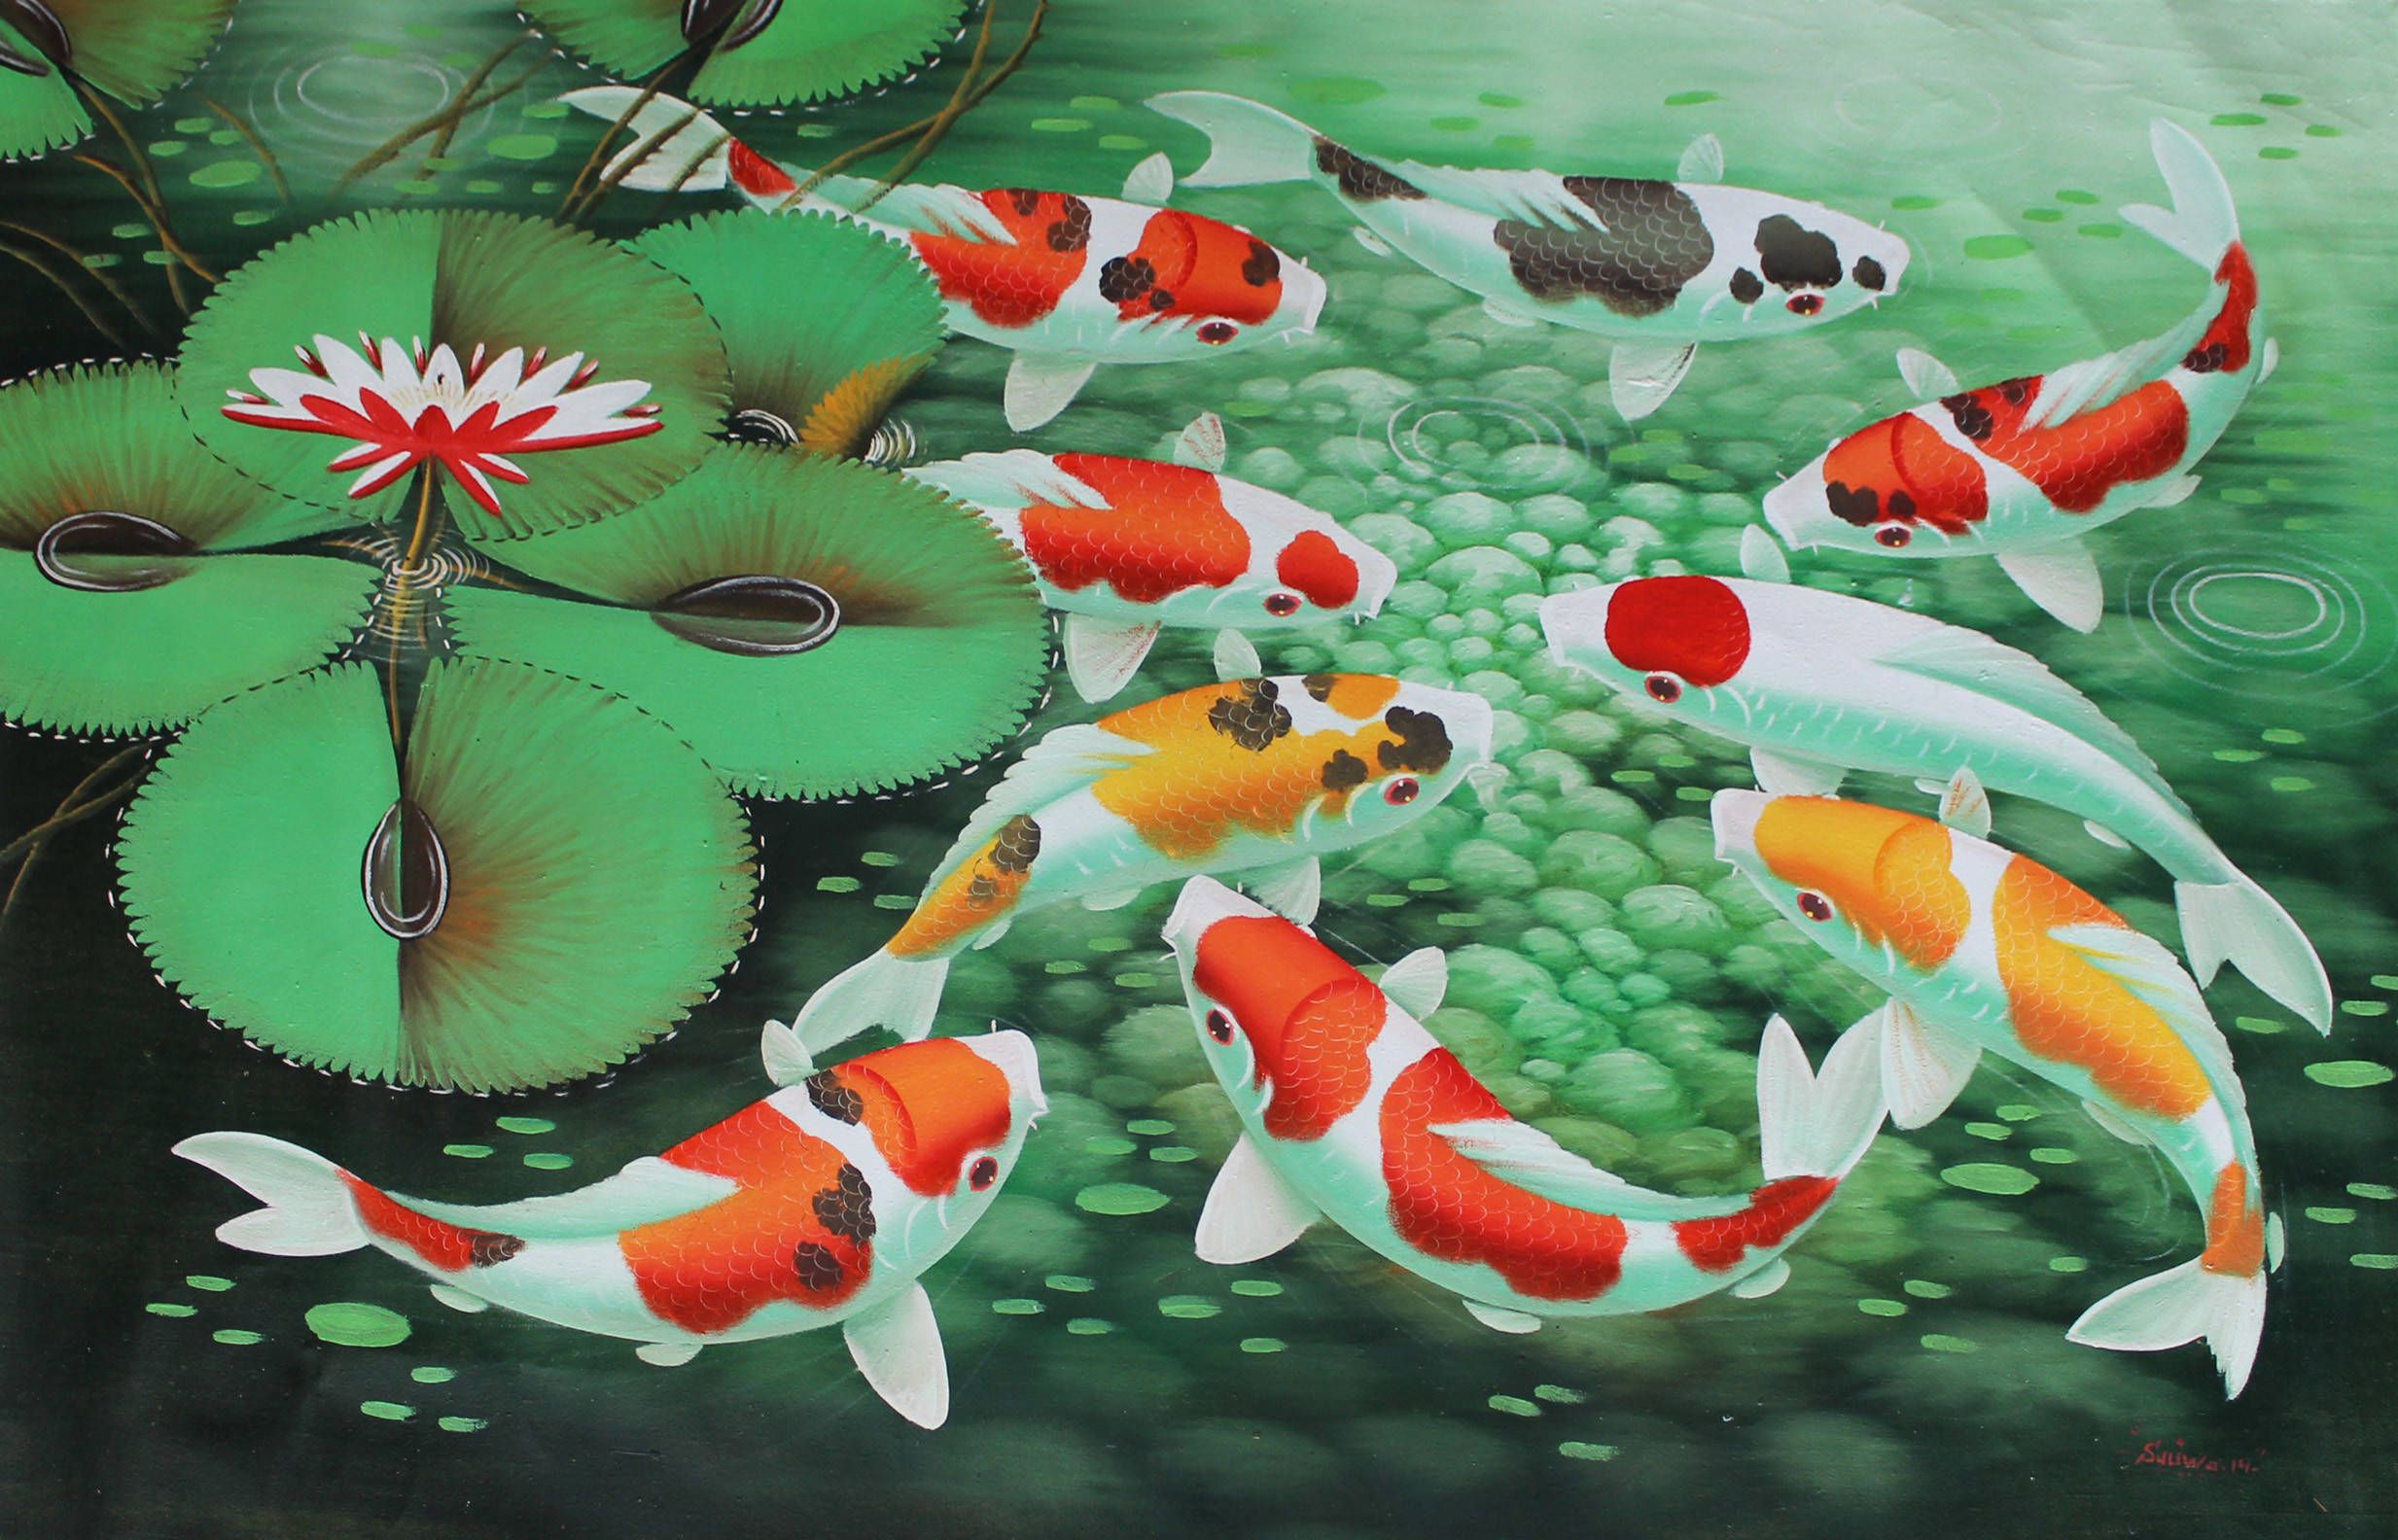 A painting of koi fish in the water - Koi fish